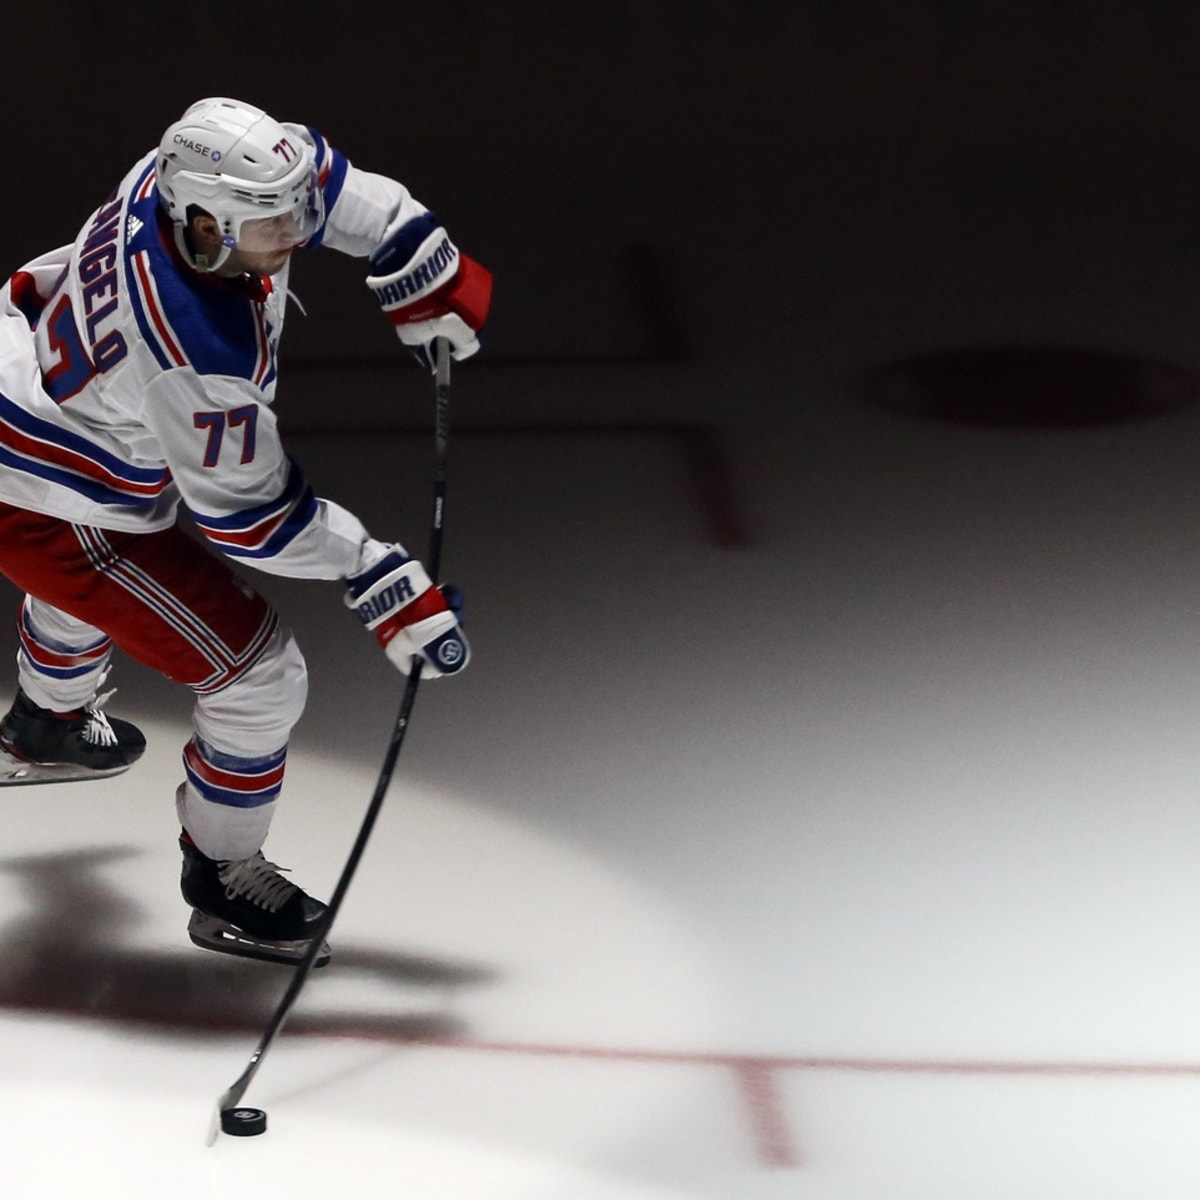 Rangers' Tony DeAngelo's Twitter account appeared to be